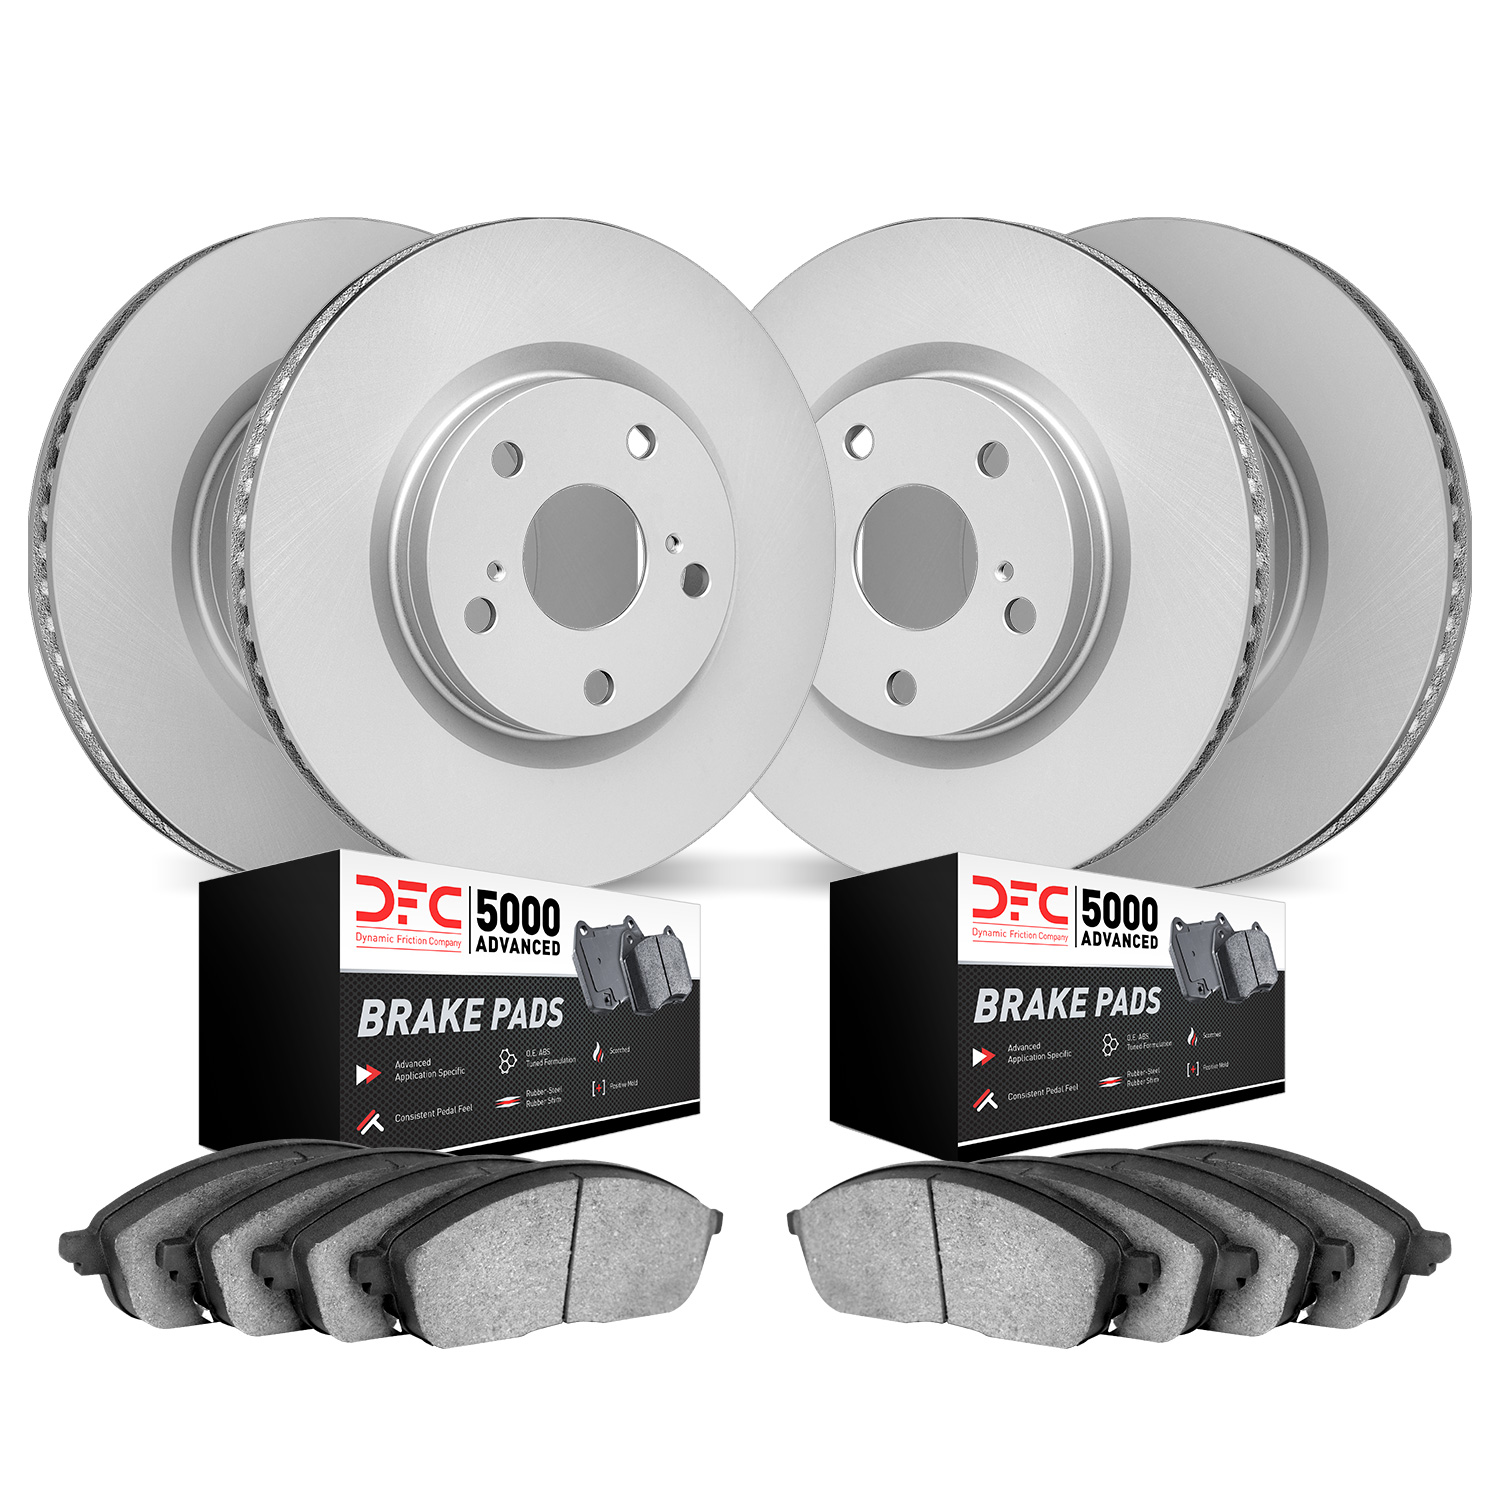 4504-54073 Geospec Brake Rotors w/5000 Advanced Brake Pads Kit, 2005-2014 Ford/Lincoln/Mercury/Mazda, Position: Front and Rear